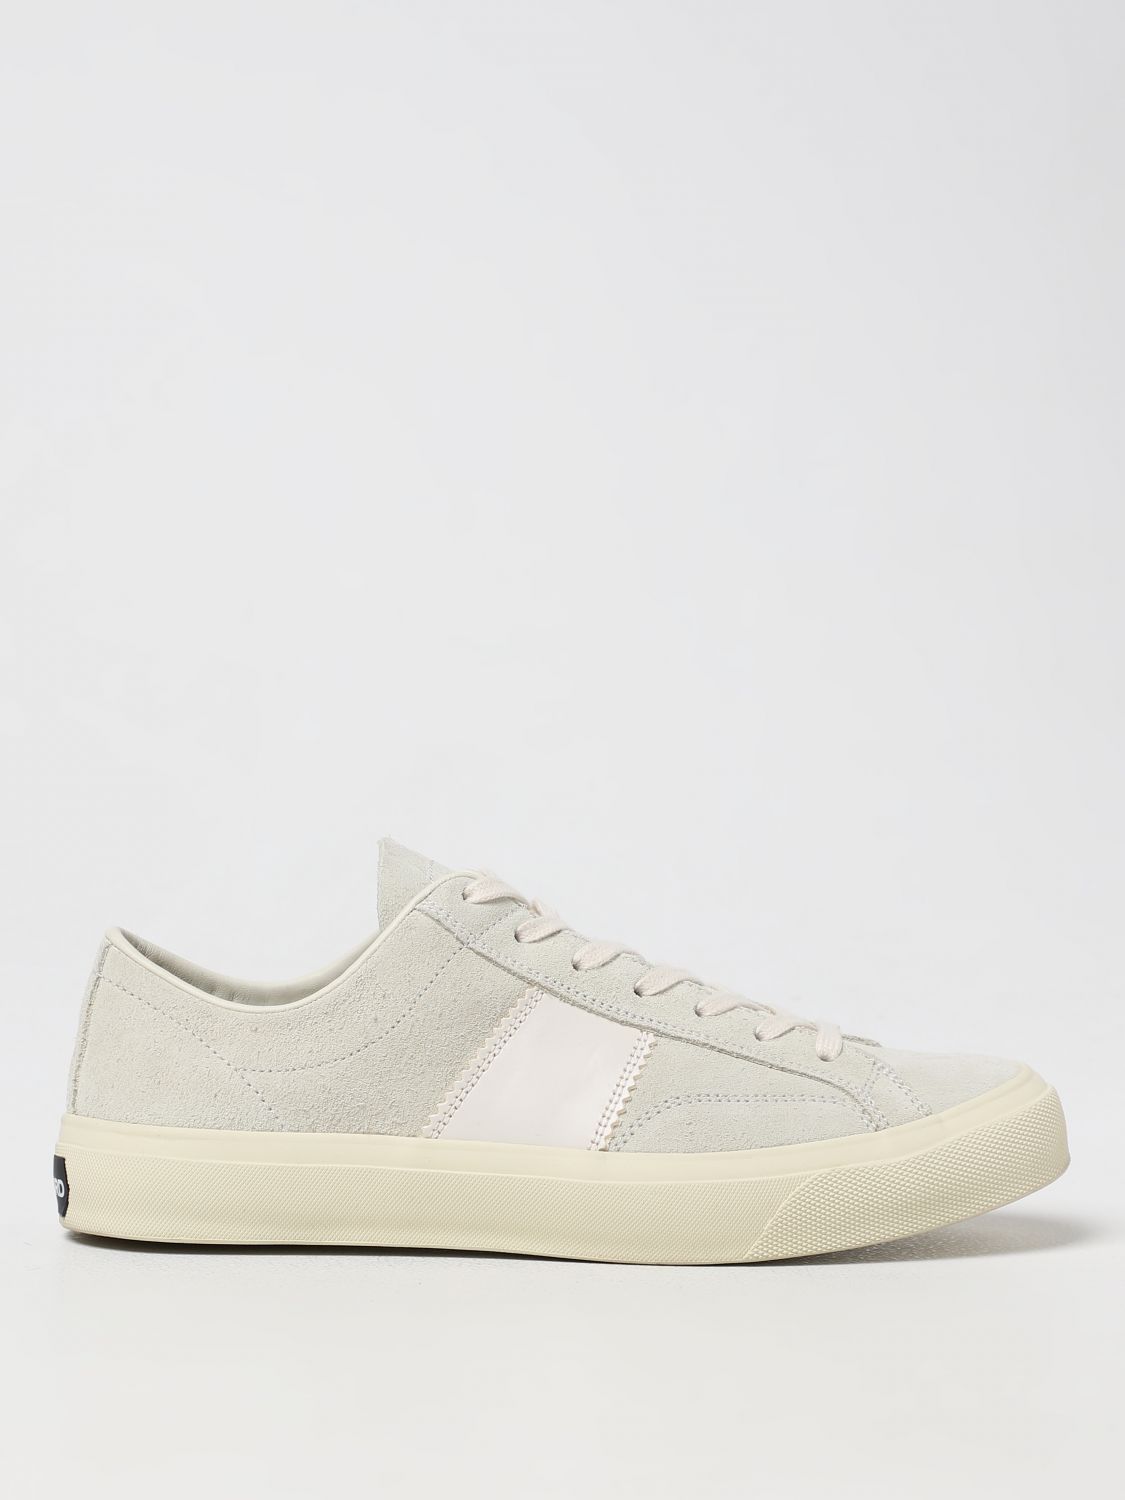 TOM FORD SUEDE SNEAKERS,E48737001